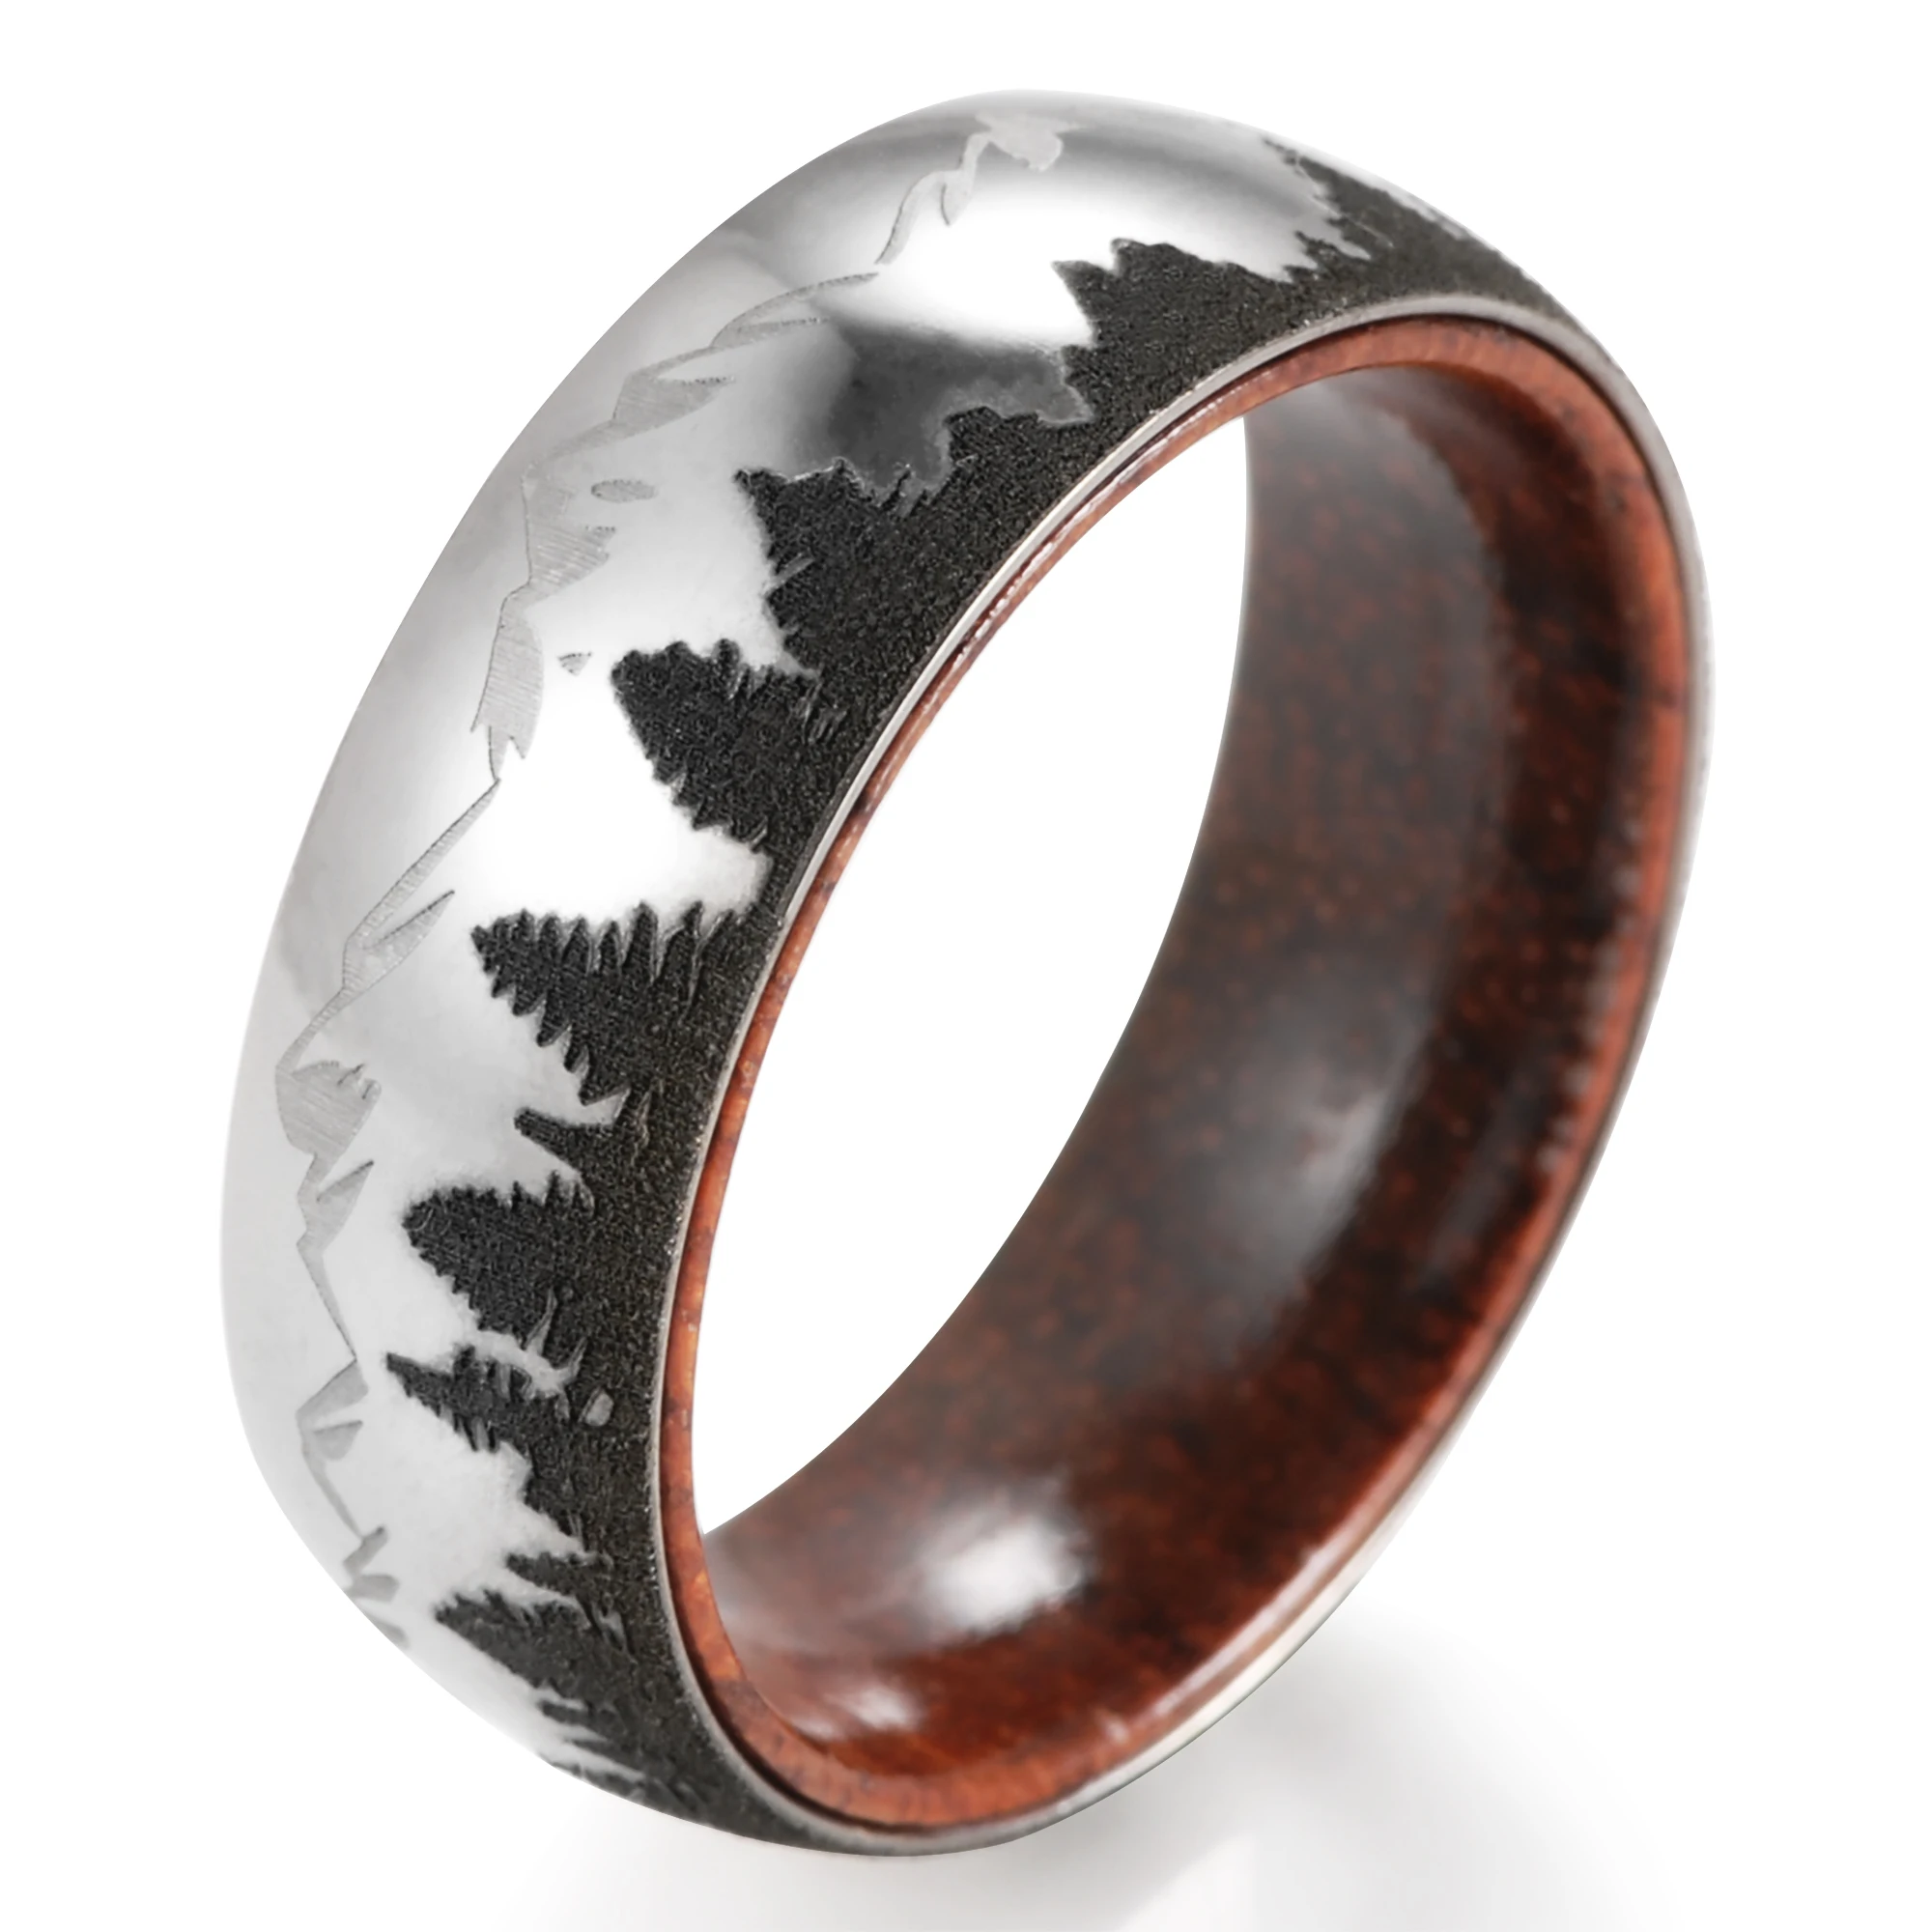 

8mm Forest& Mountains Scene Ring Titanium Wooden Ring Men’s Wedding Band Olive Wooden Ring Pure Titanium Anniversary Ring